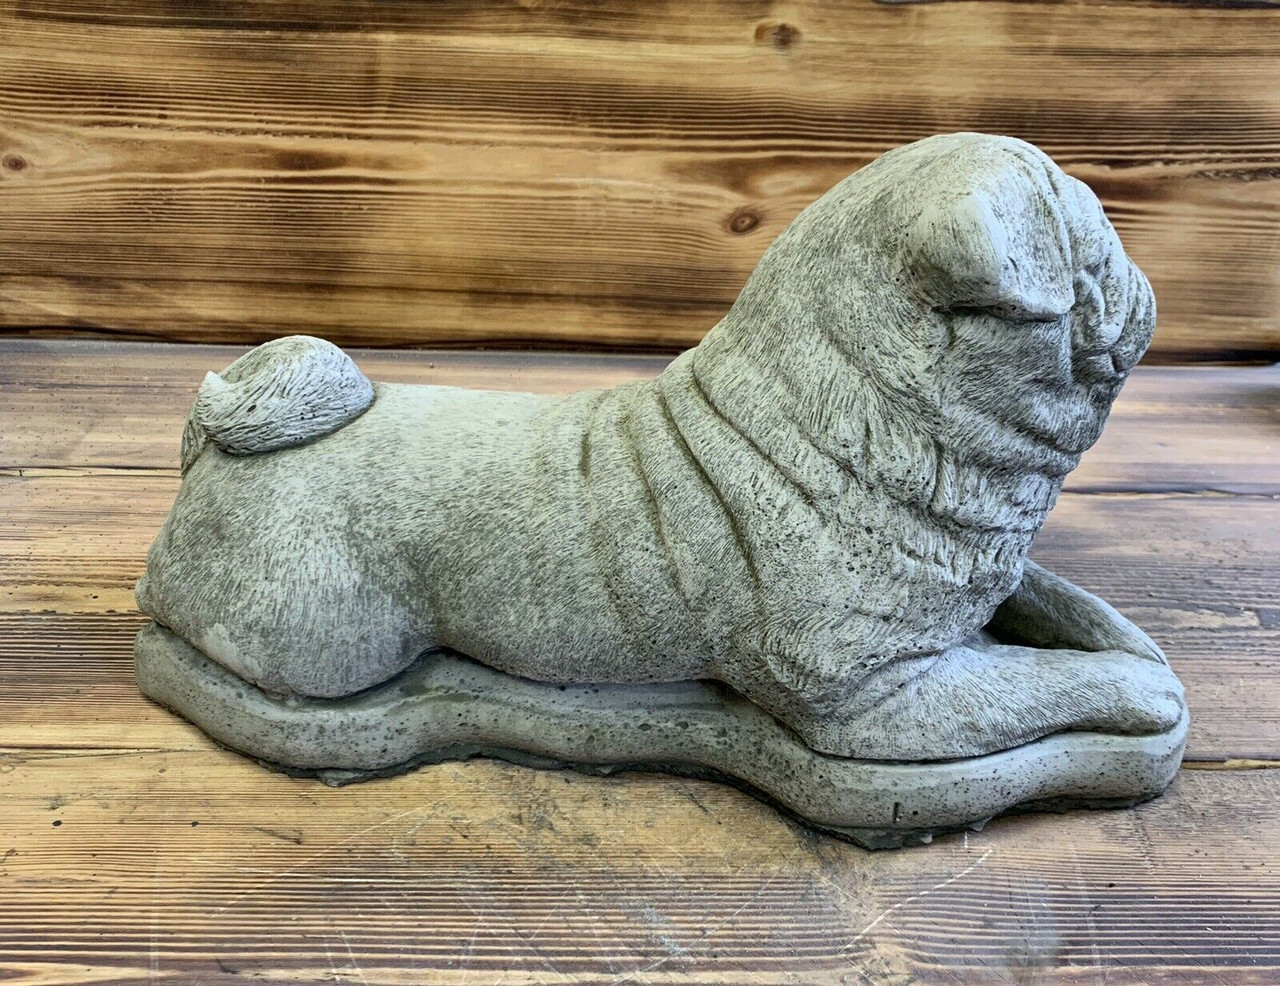 STONE GARDEN LARGE LAYING PUG ORNAMENT STATUE 